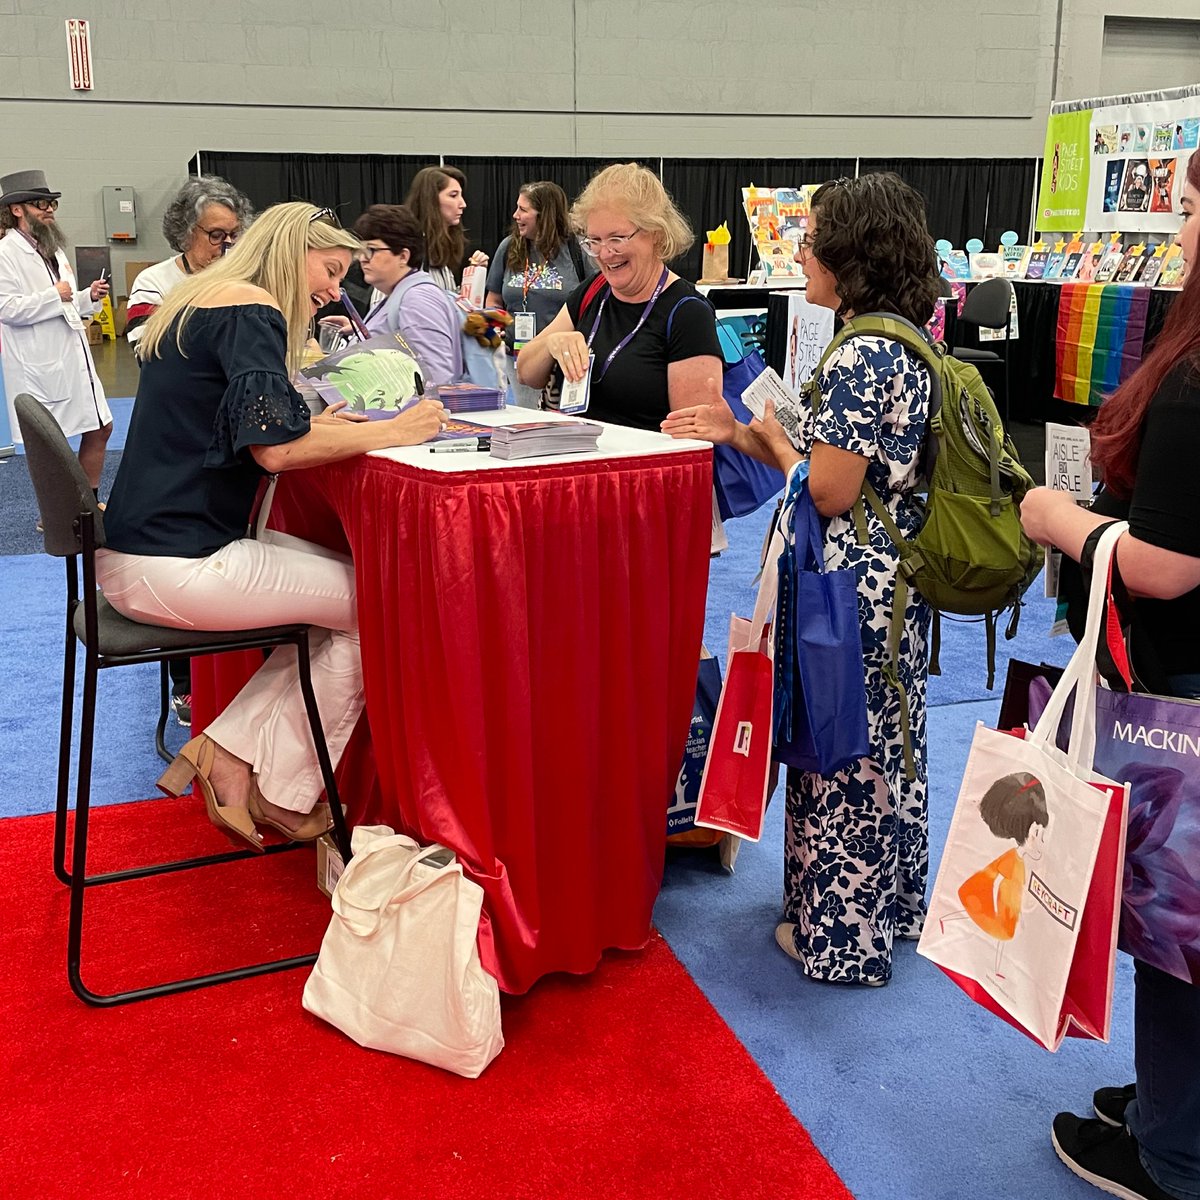 We had such a great day yesterday at #TXLA23 with Steve Metzger, Laura Seely-Pollack, and so many amazing people who visited booth #1734! We're so excited for another two days of fun! @TXLA #TLA23